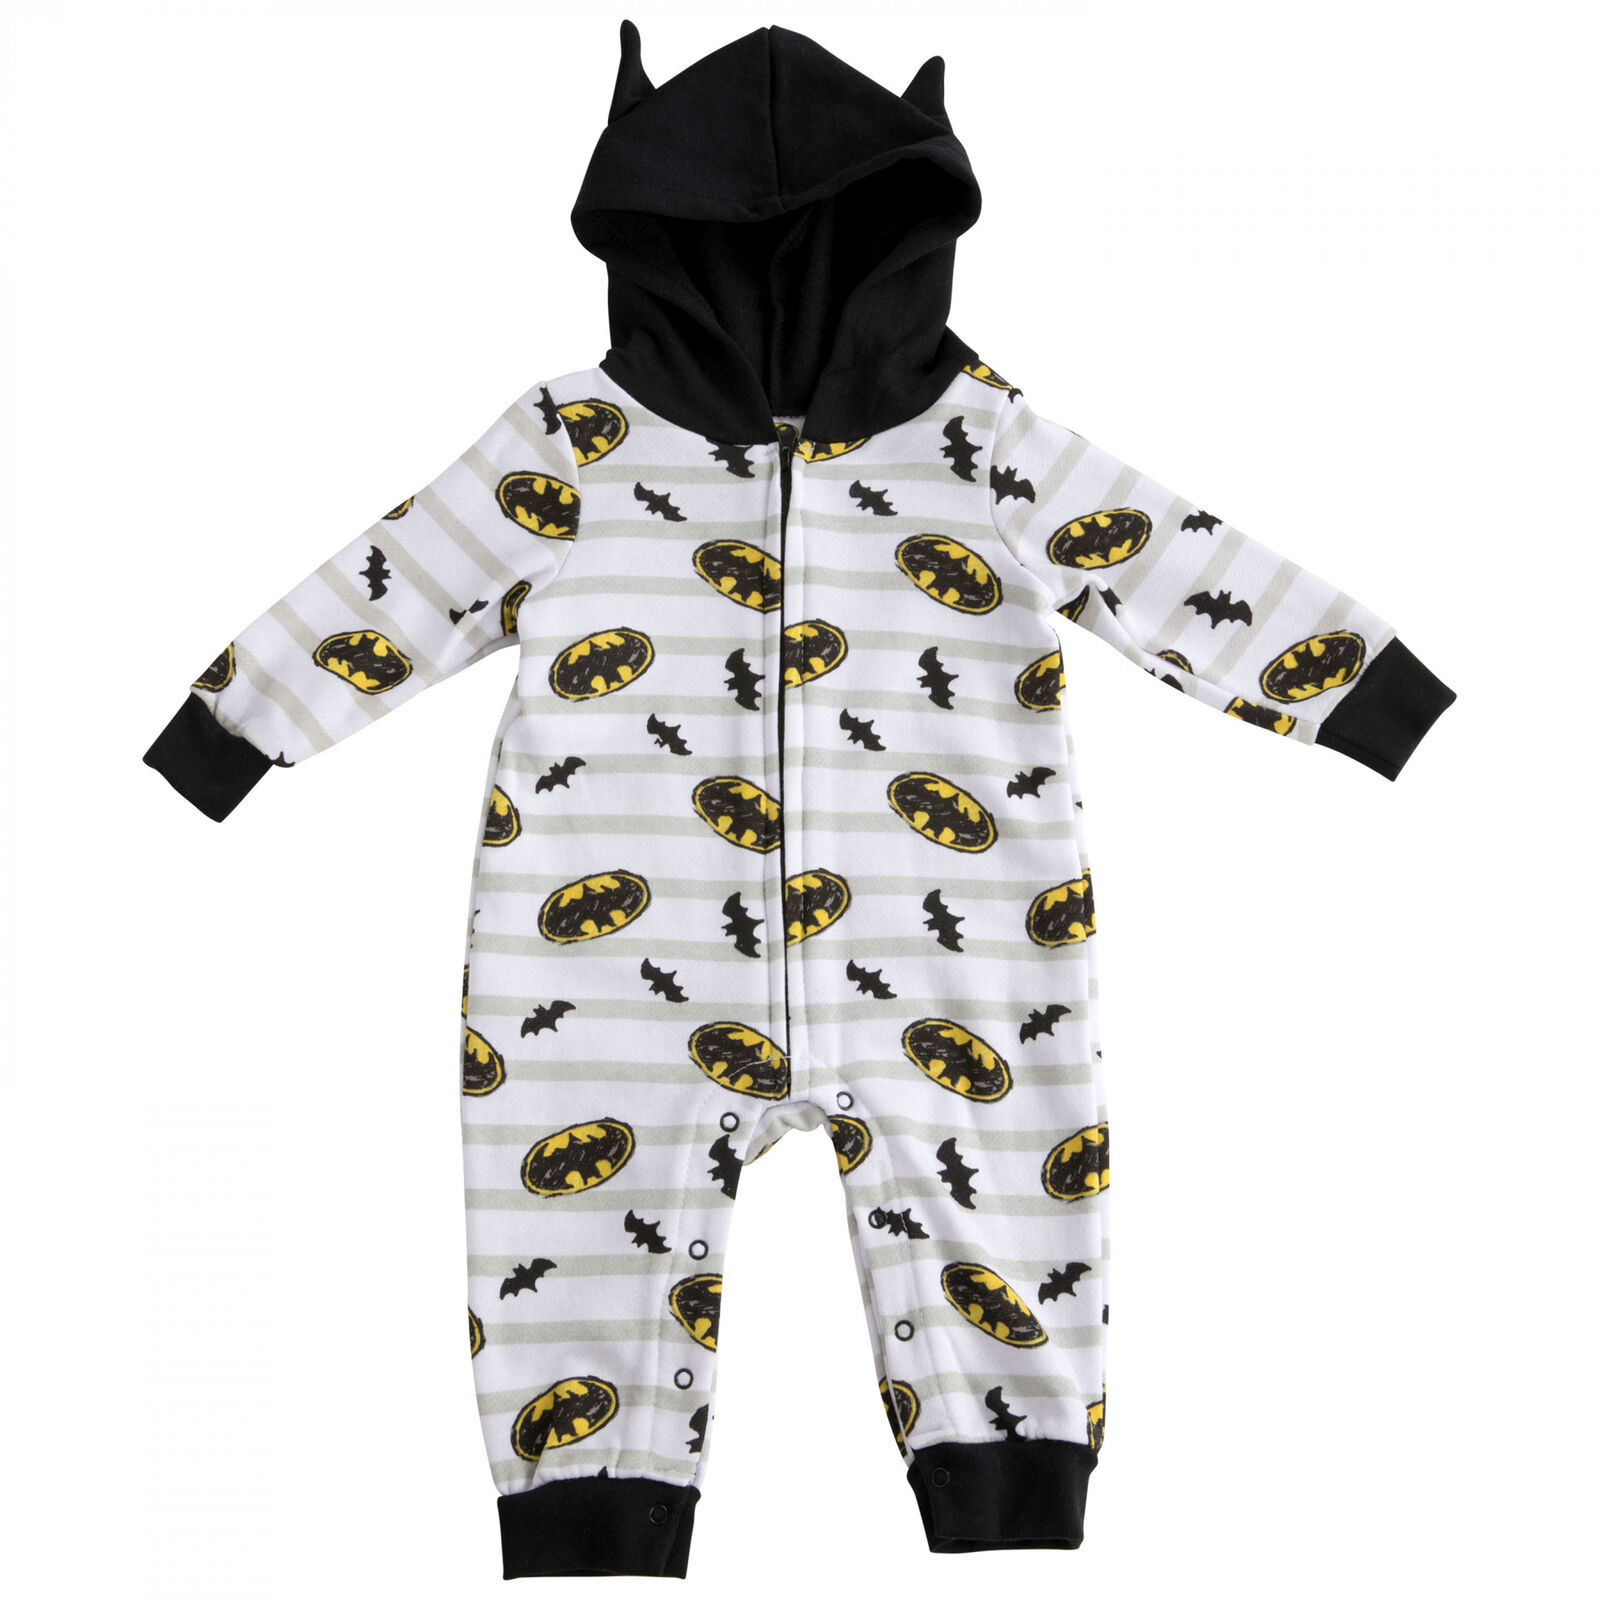 Primary image for Batman Symbols Infant Hooded Fleece Coveralls with Ears Multi-Color